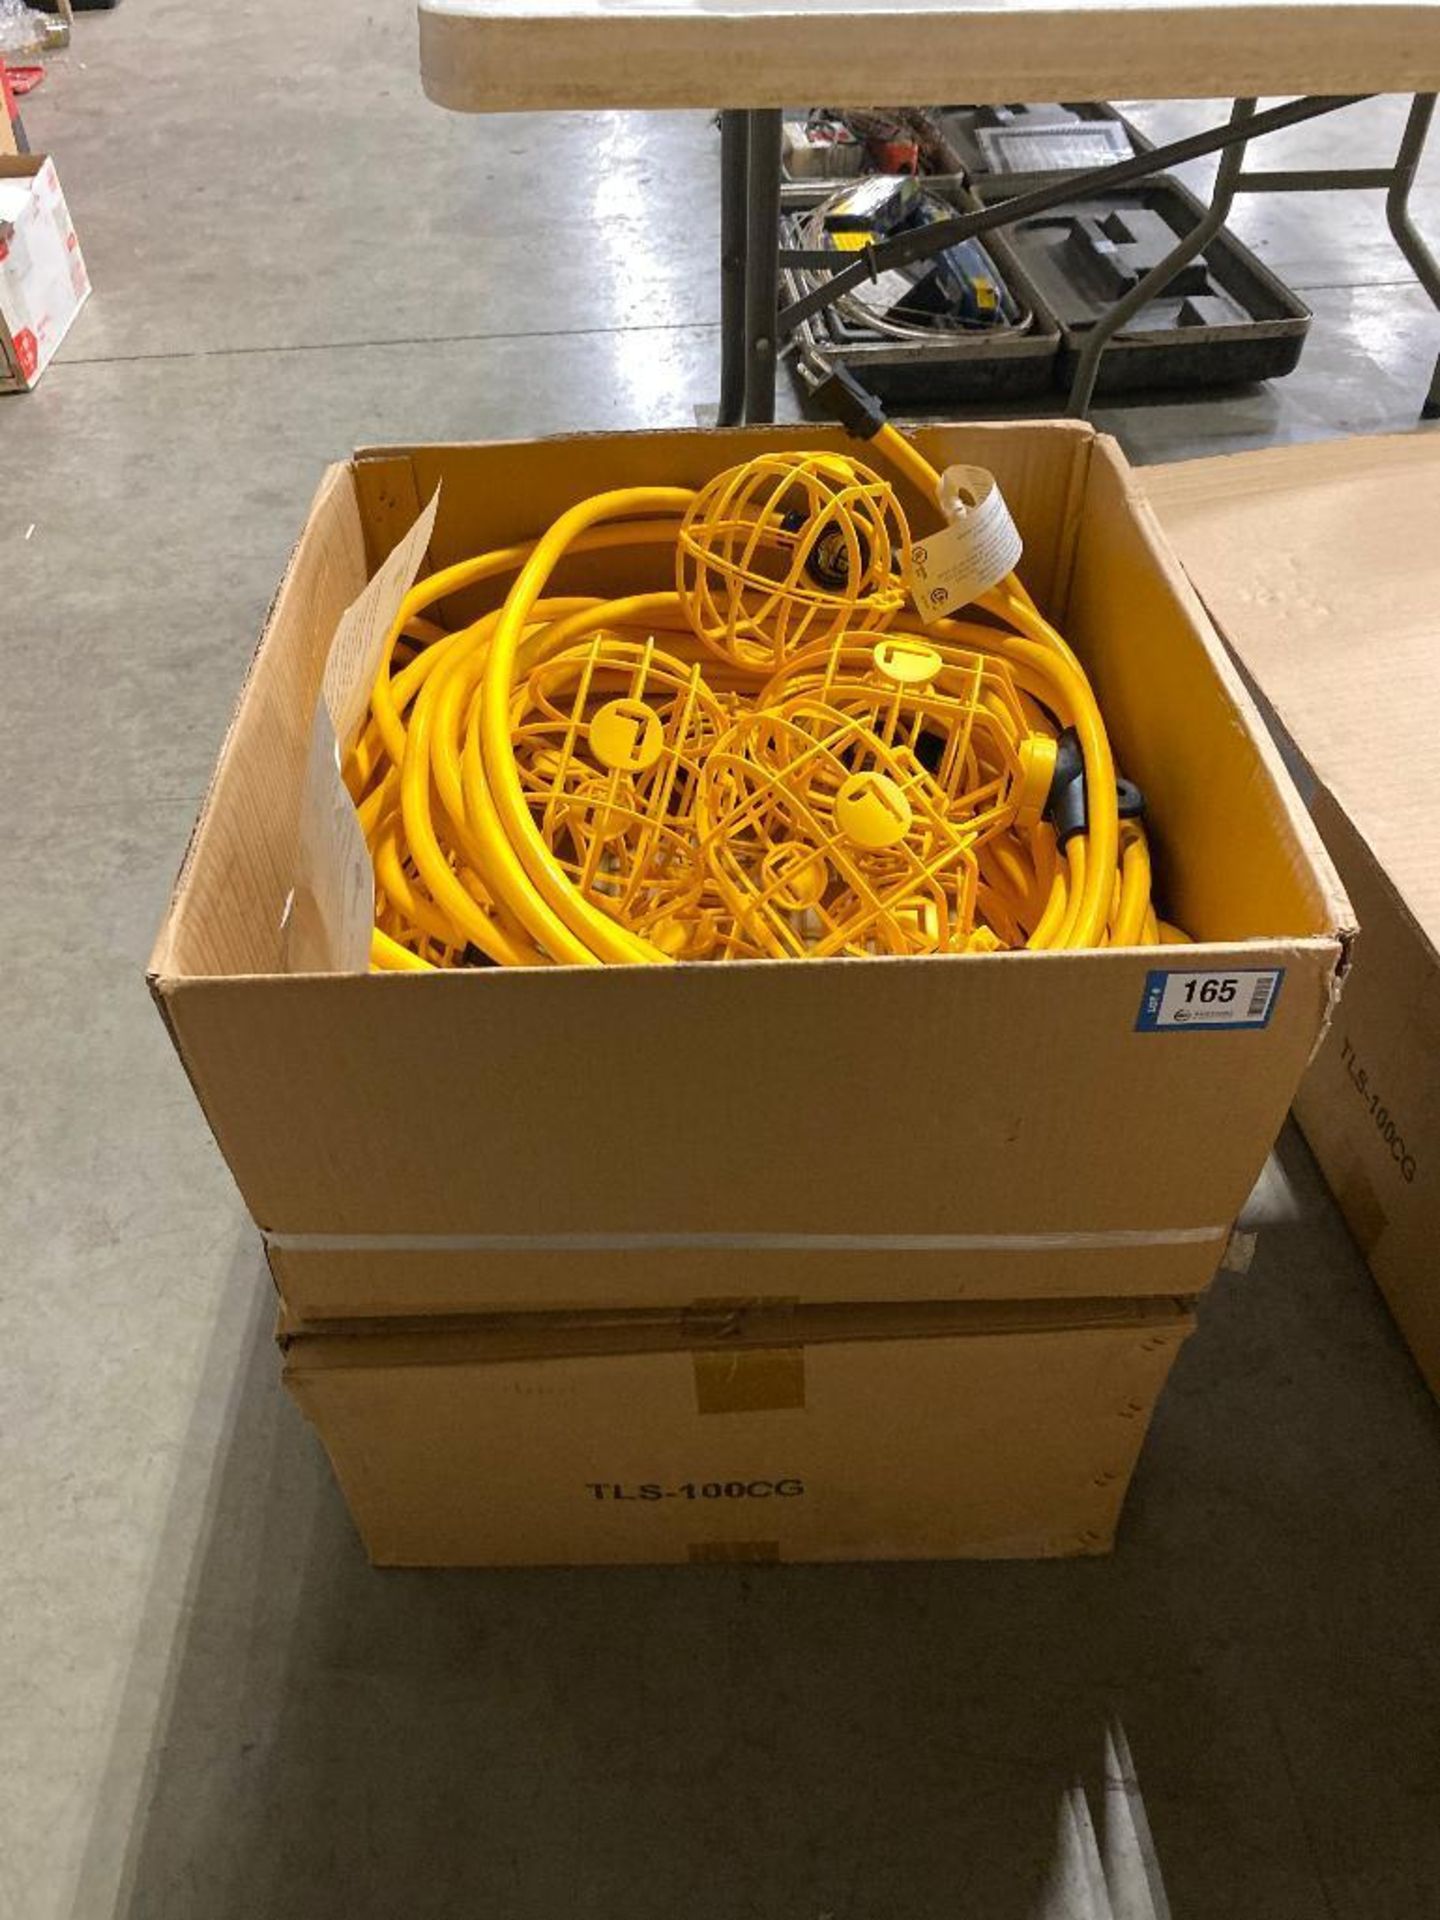 Lot of (2) Boxes of Lind Equipment String Lighting, TLS-100CG - Image 2 of 6